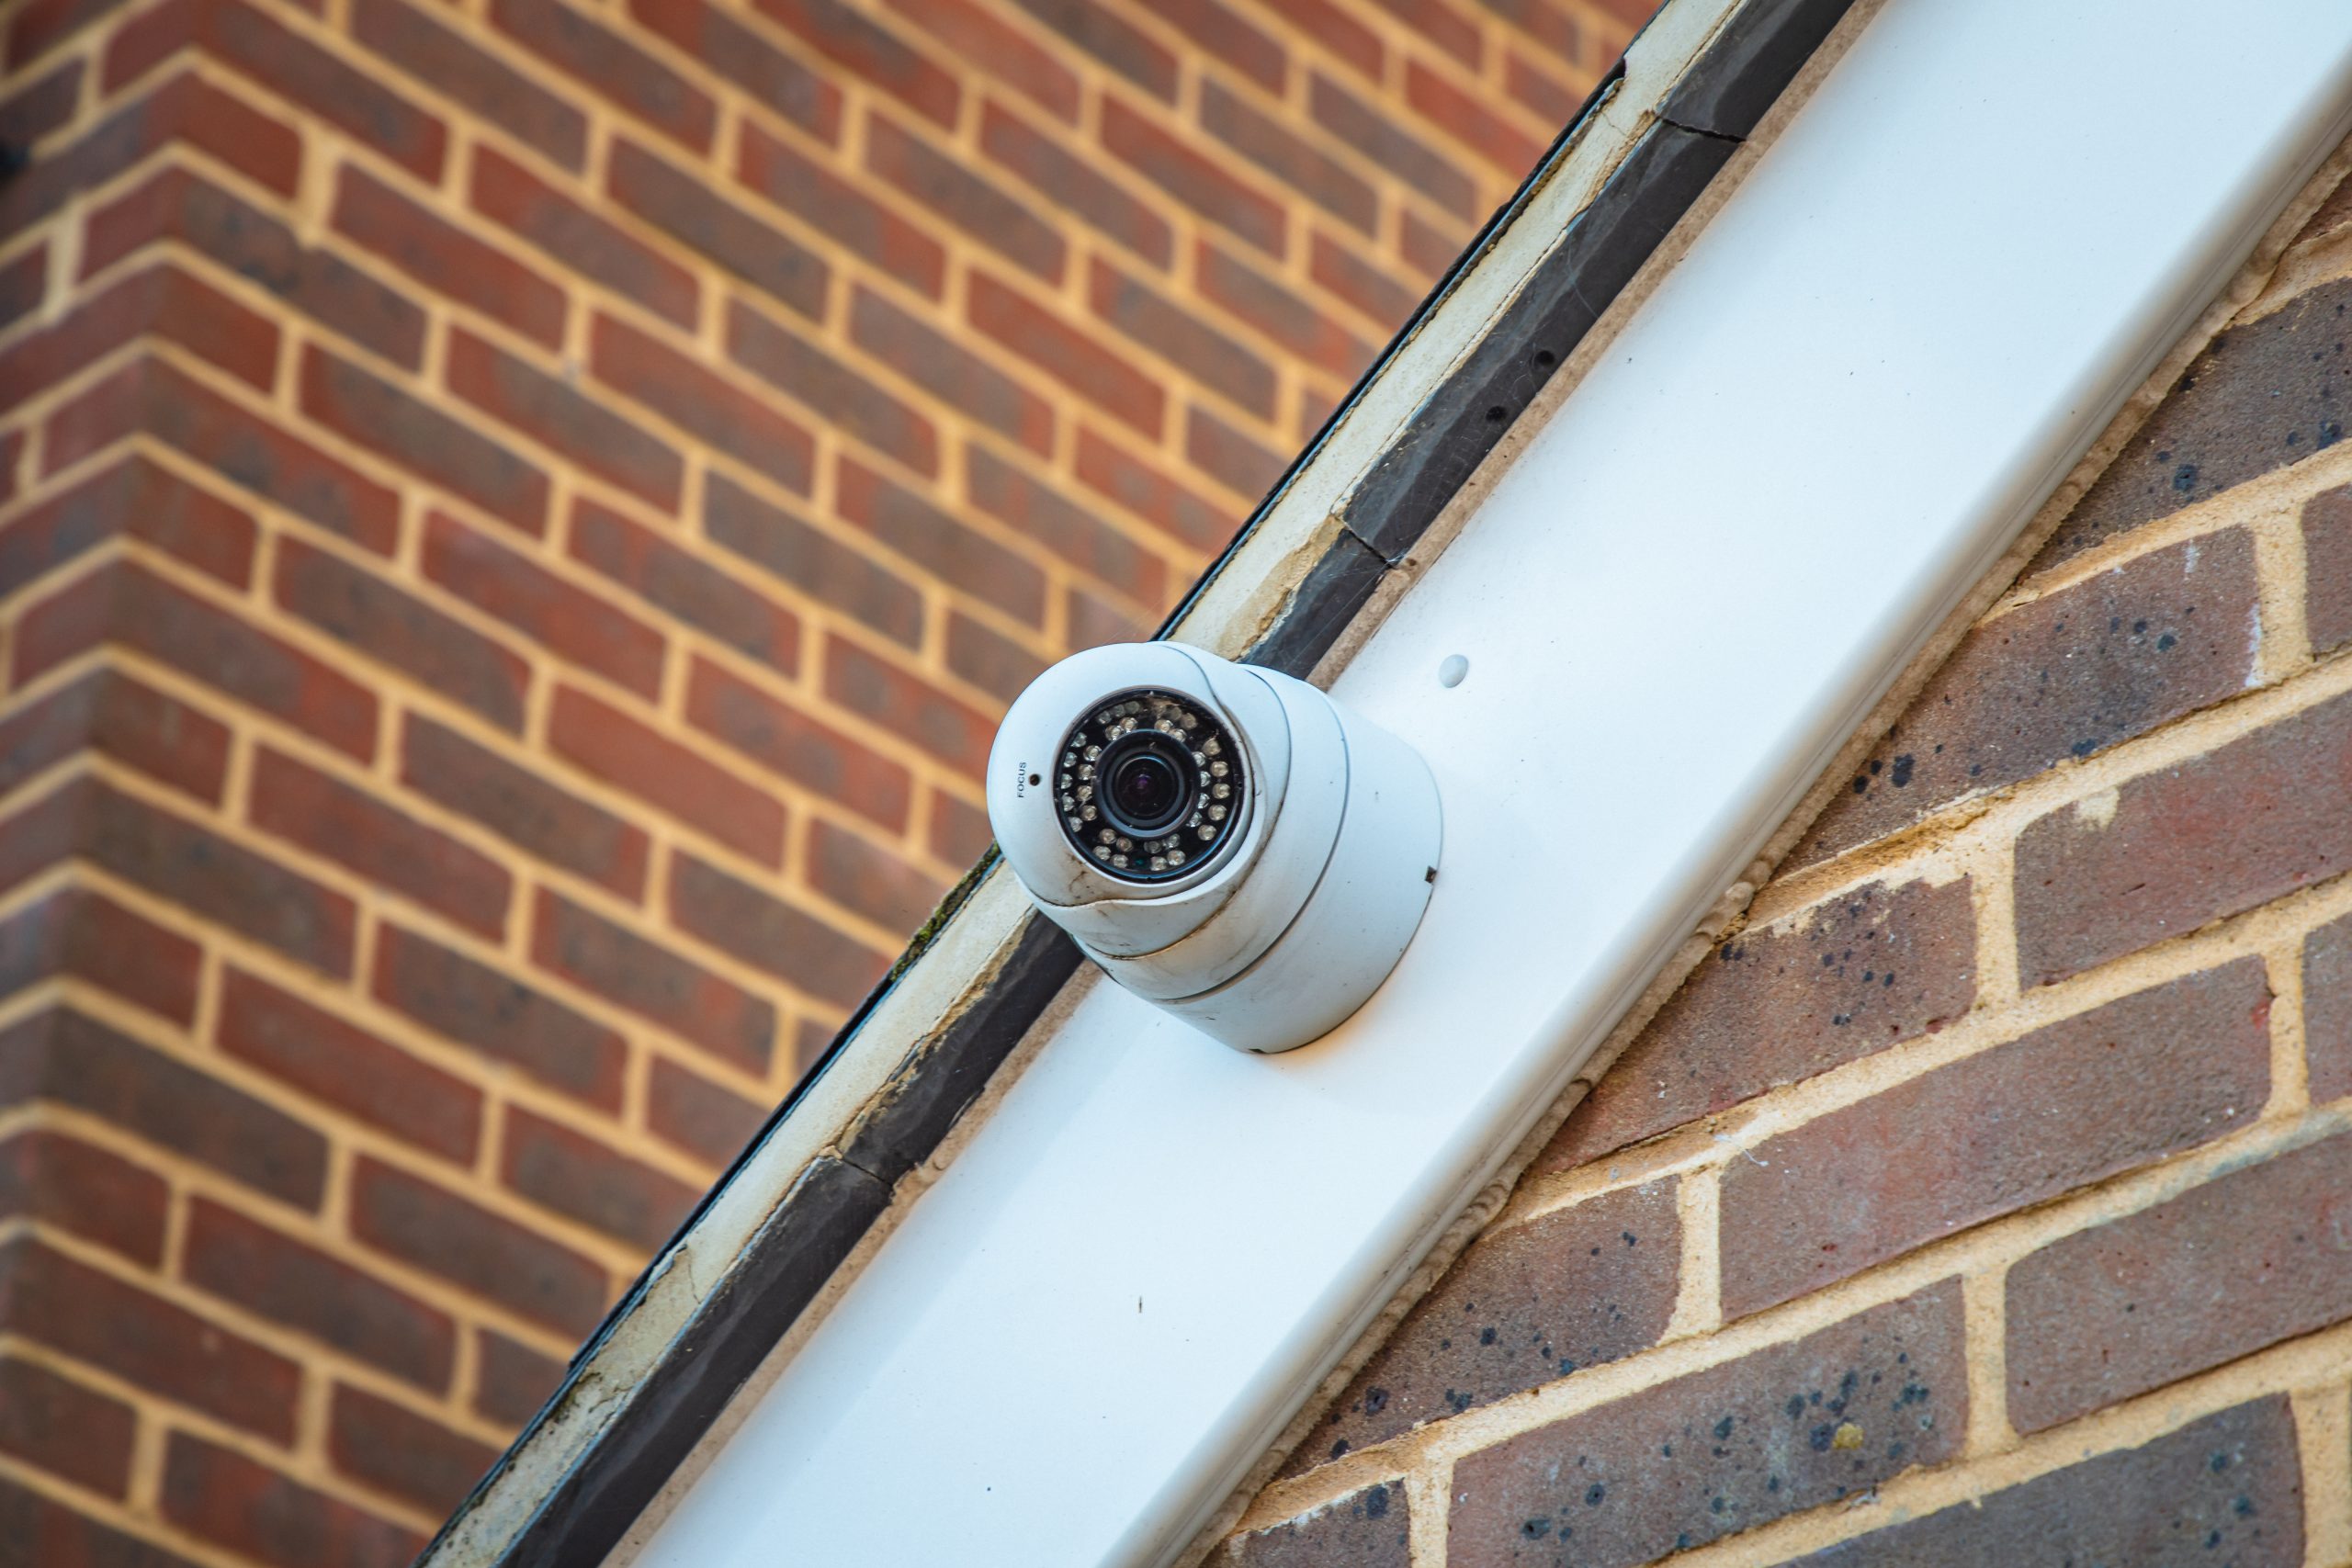 Hmo Fire Safety And Security Services In Maidstone Medway And Tonbridge Astra Security Systems